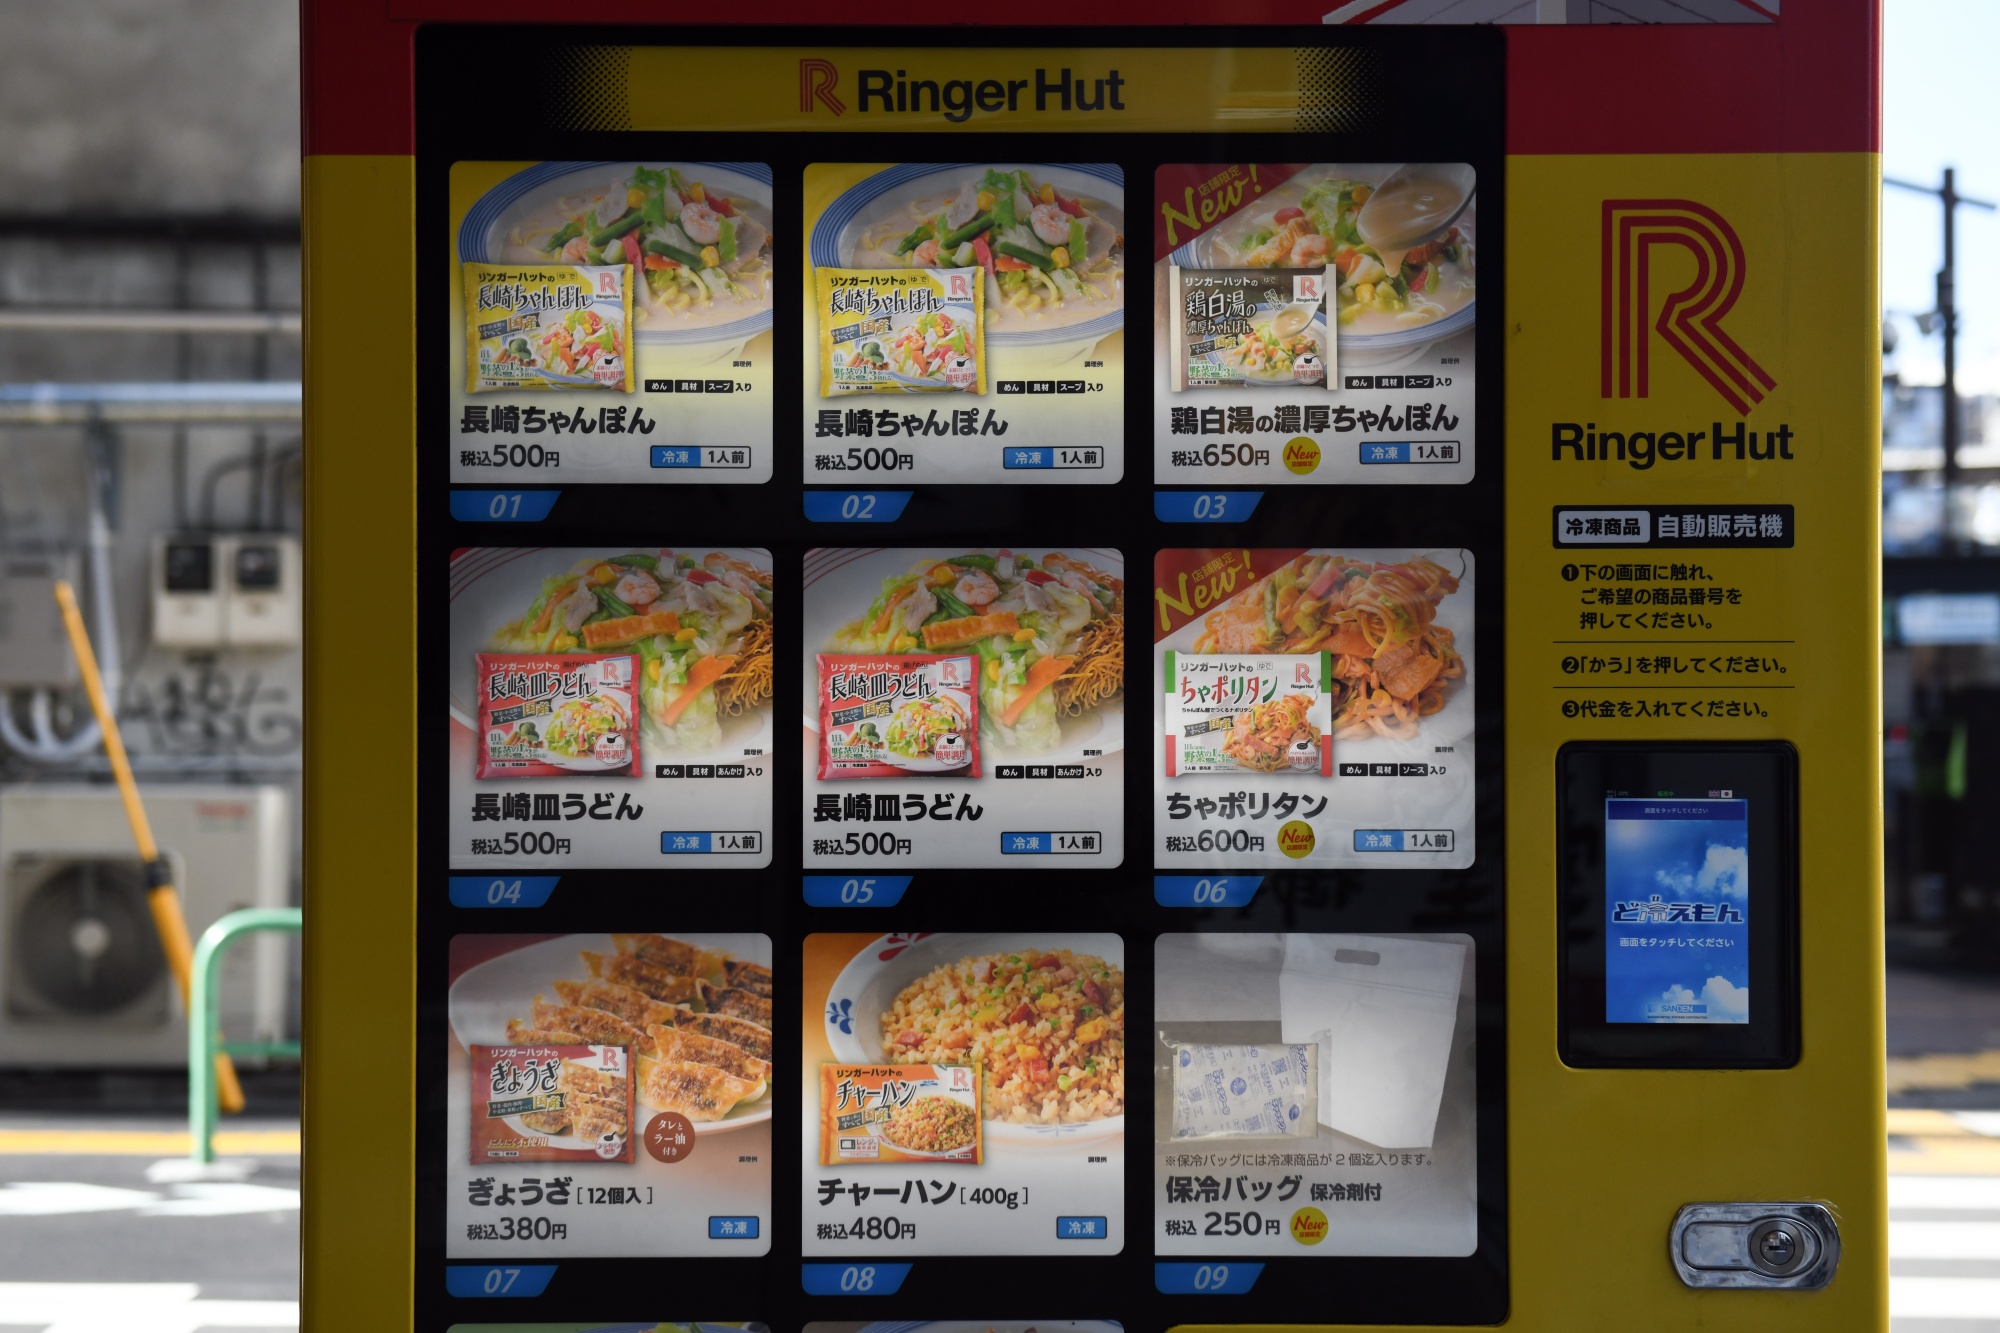 Japan's Vending Machine Designs Are Like No Other Country's